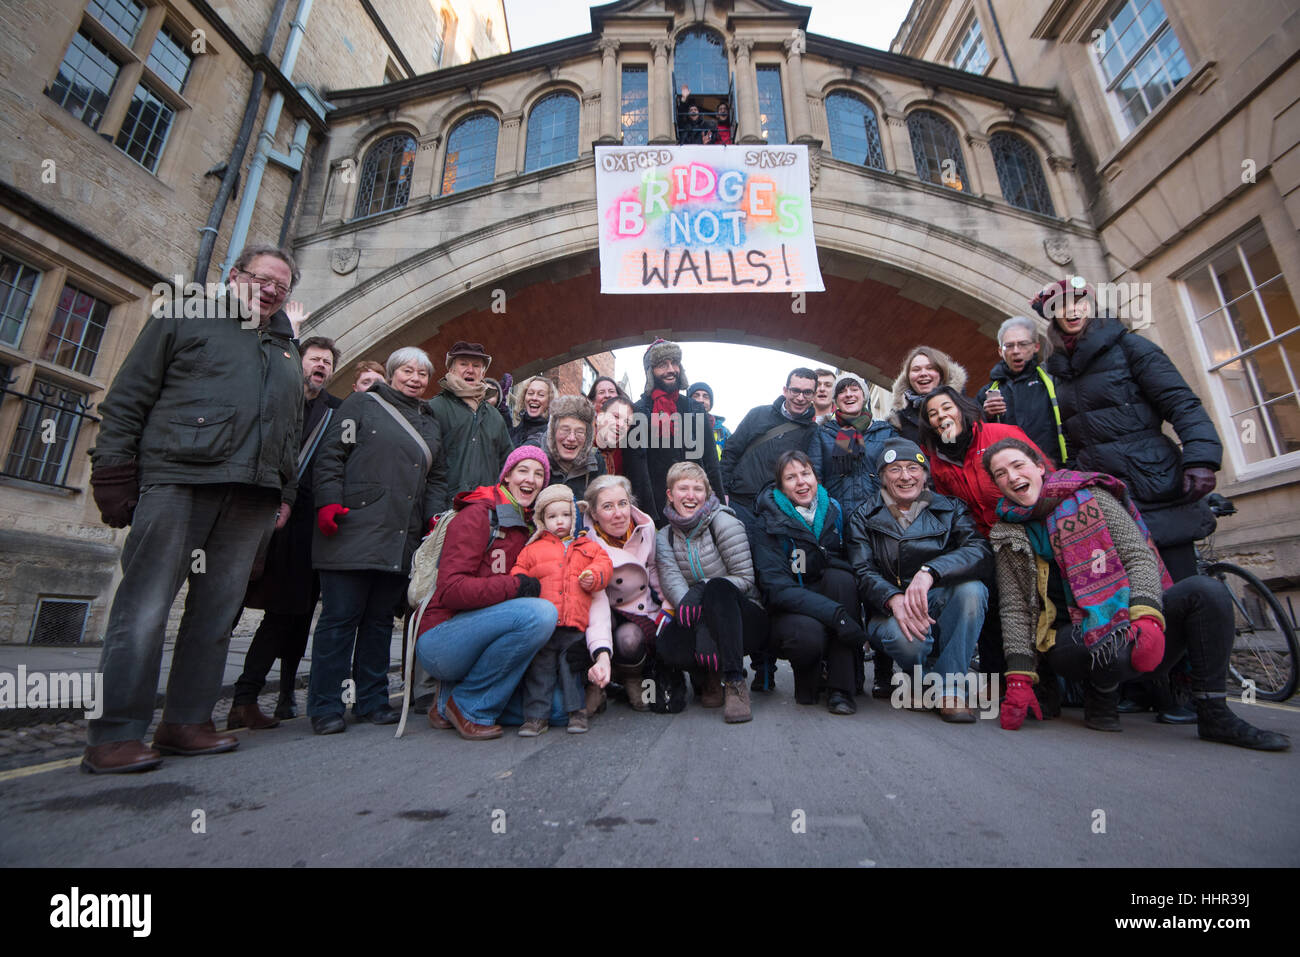 Oxford, UK. 20th January 2017. Oxford residents will be gathering in colourful clothes for a banner-drop at the Bridge of Sighs this morning protesting the rise of the far right and standing in solidarity with groups that feel threatened as Trump comes to power. Andrew Walmsley/Alamy Live News Stock Photo